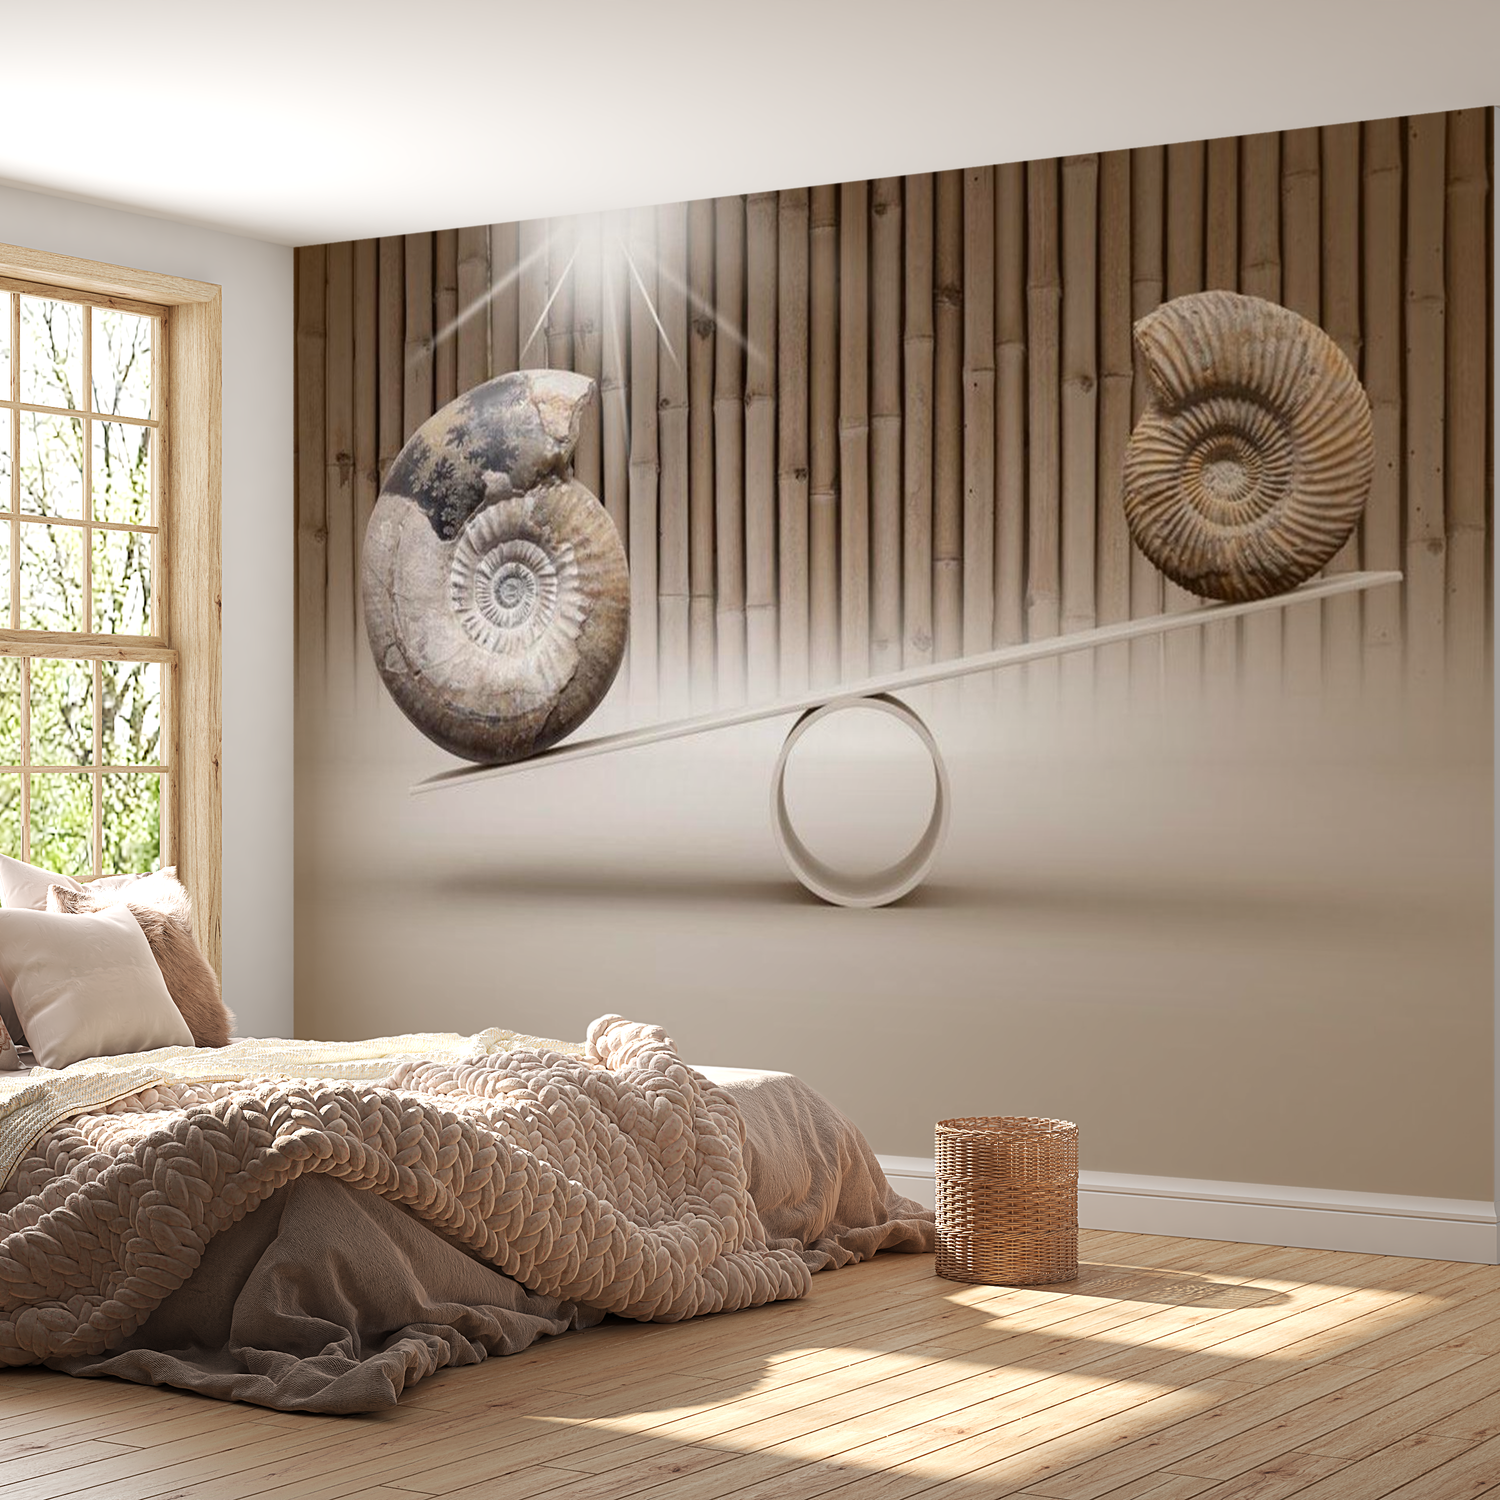 3D Illusion Wallpaper Wall Mural - Fun With Fossils 39"Wx27"H